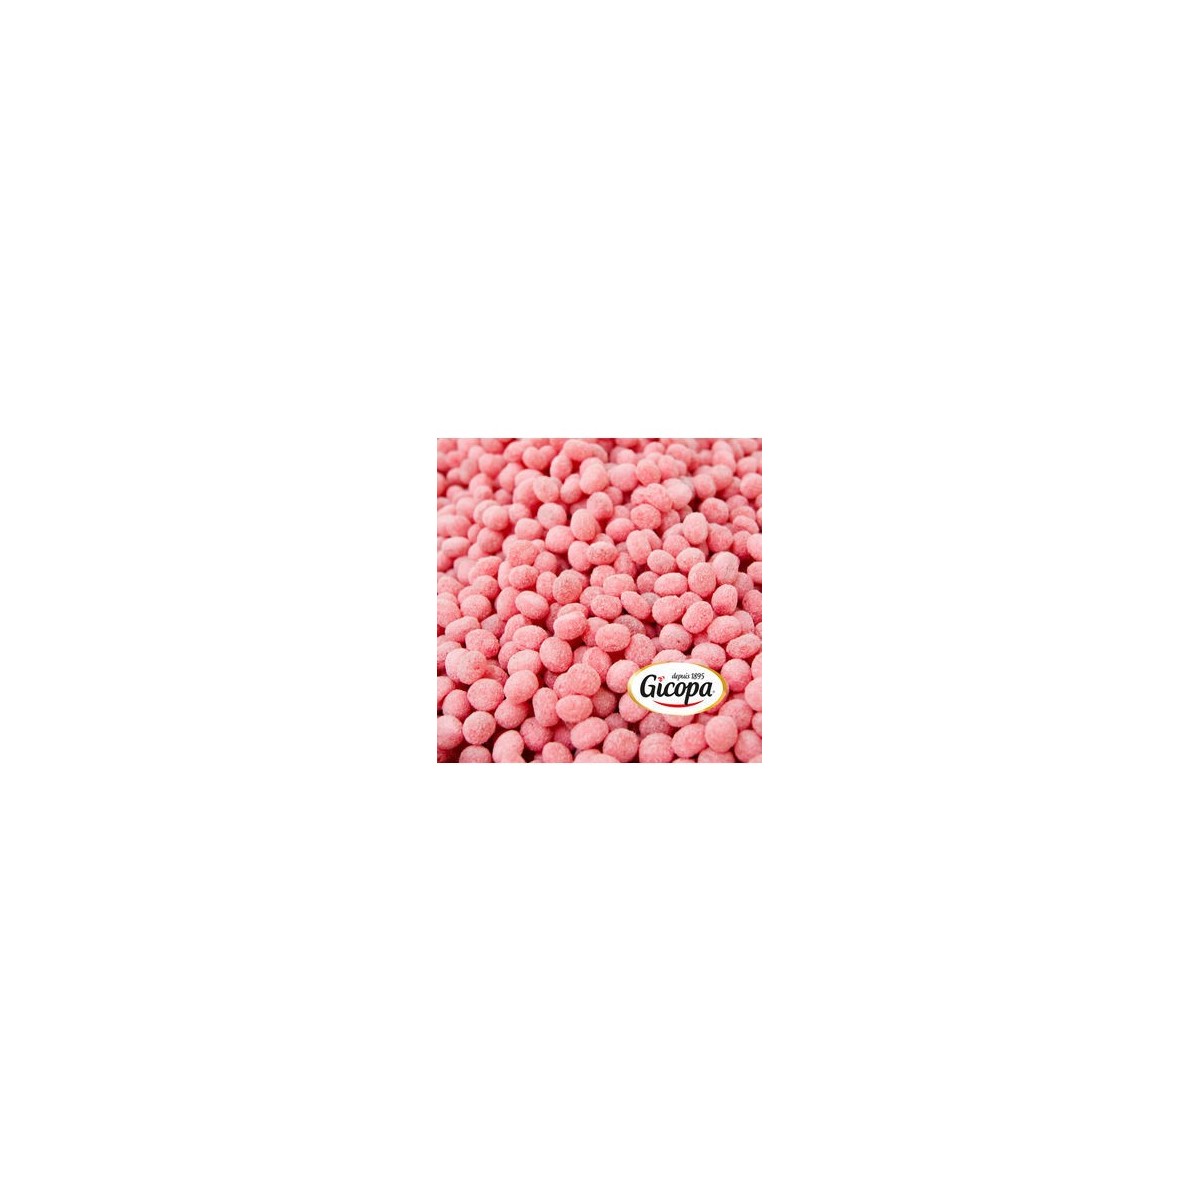 CHERRY CITRIC CANDIES 1KG GICOPA  PACKAGE